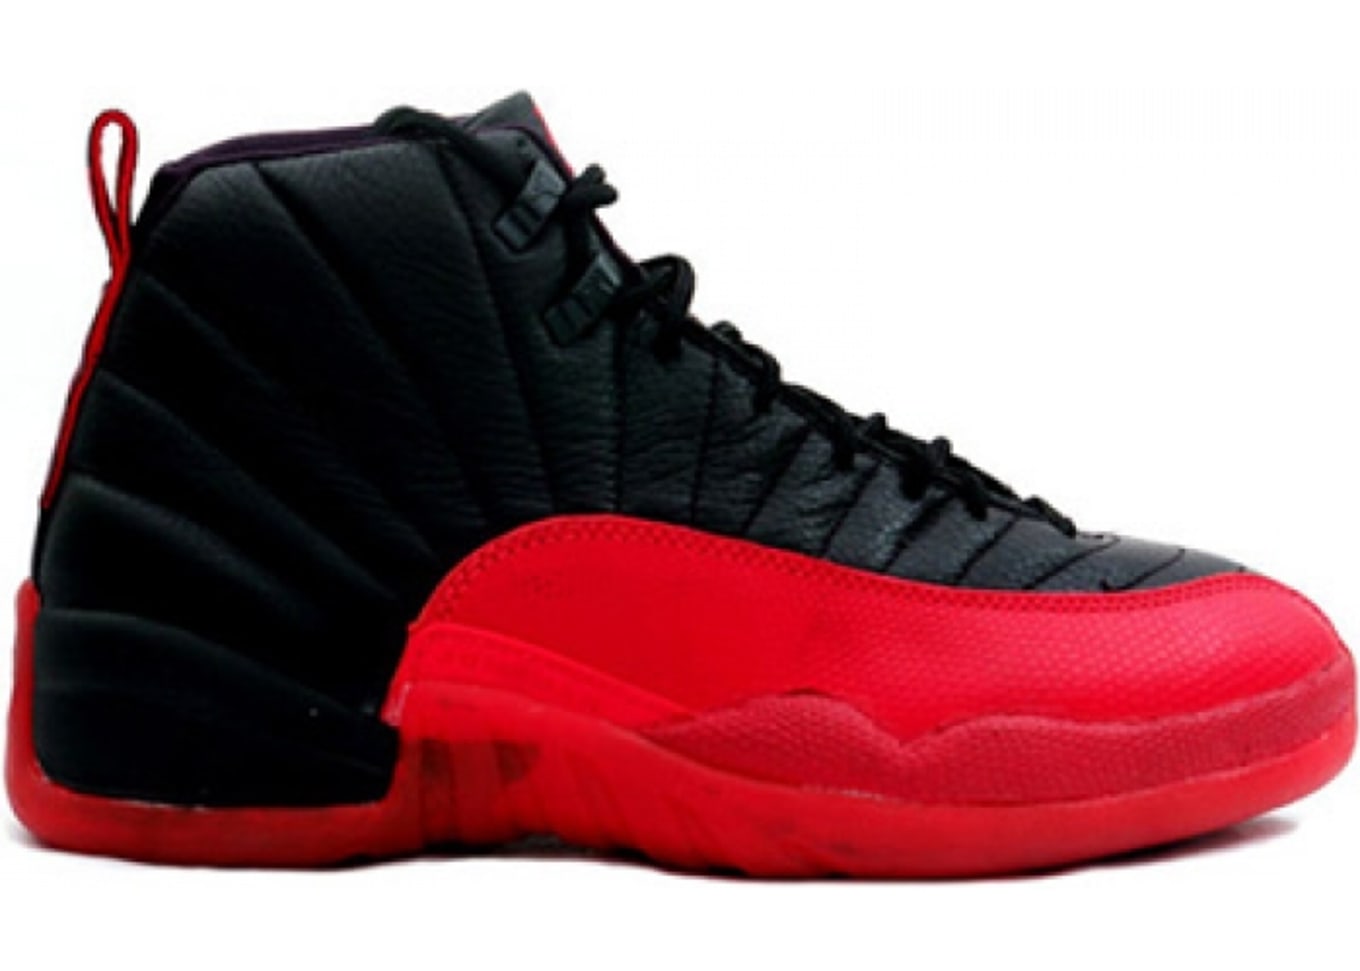 how much do the jordan 12s cost